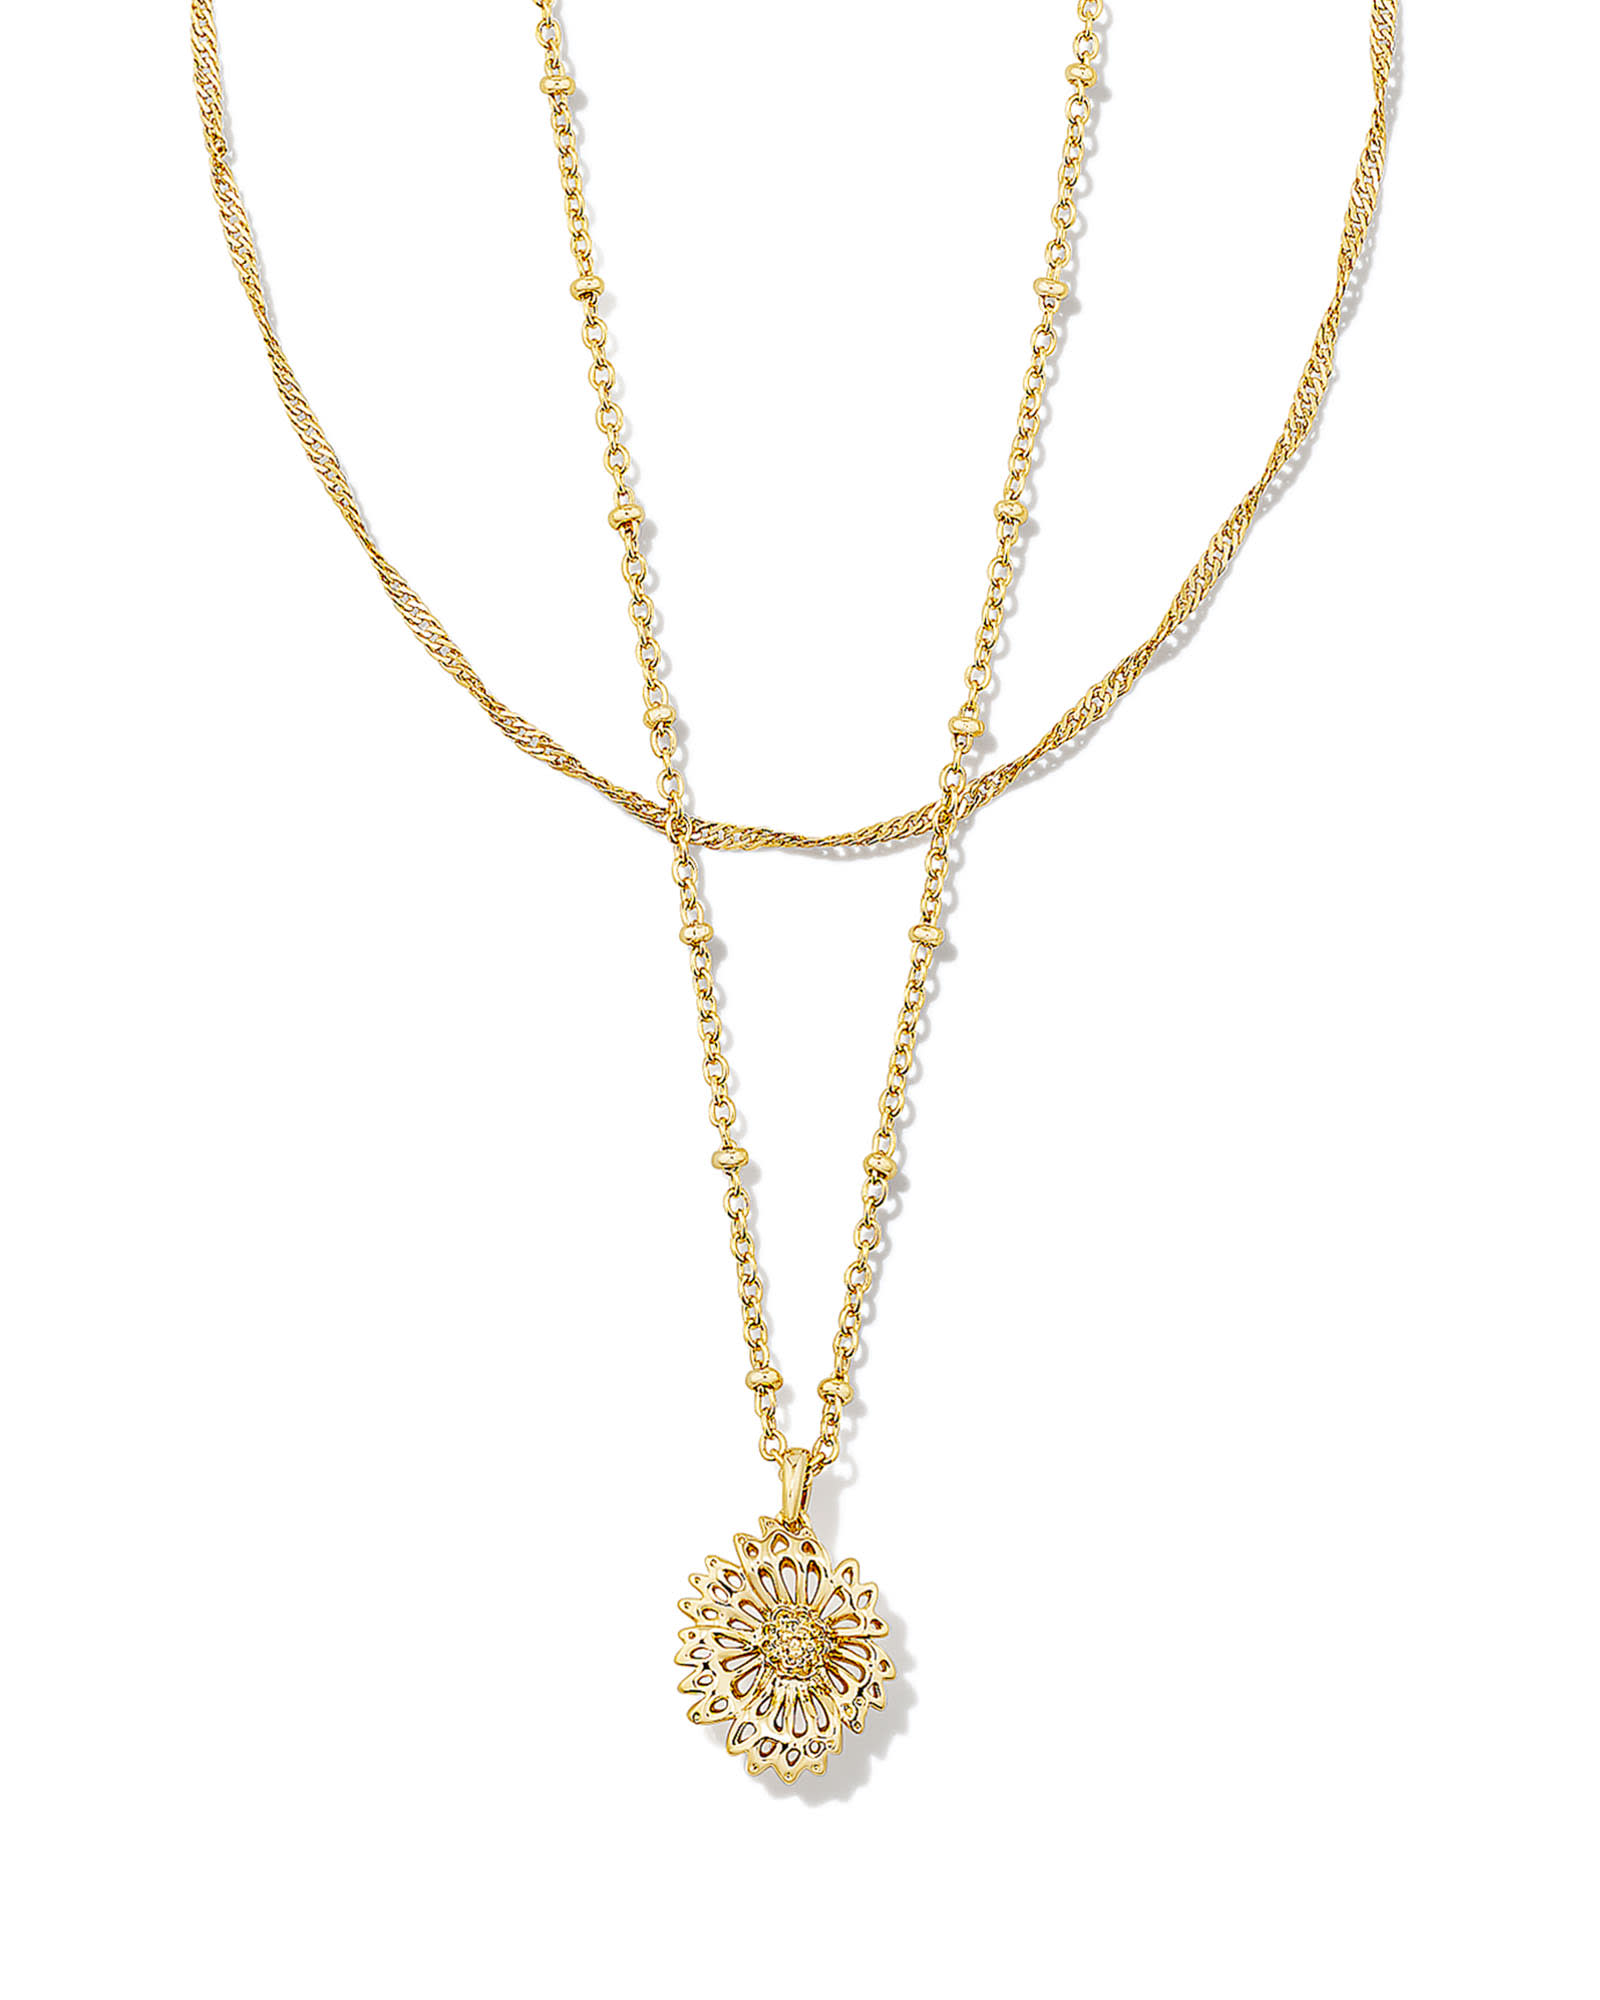 Kendra Scott Brielle Multi Strand Necklace in Gold | Plated Brass